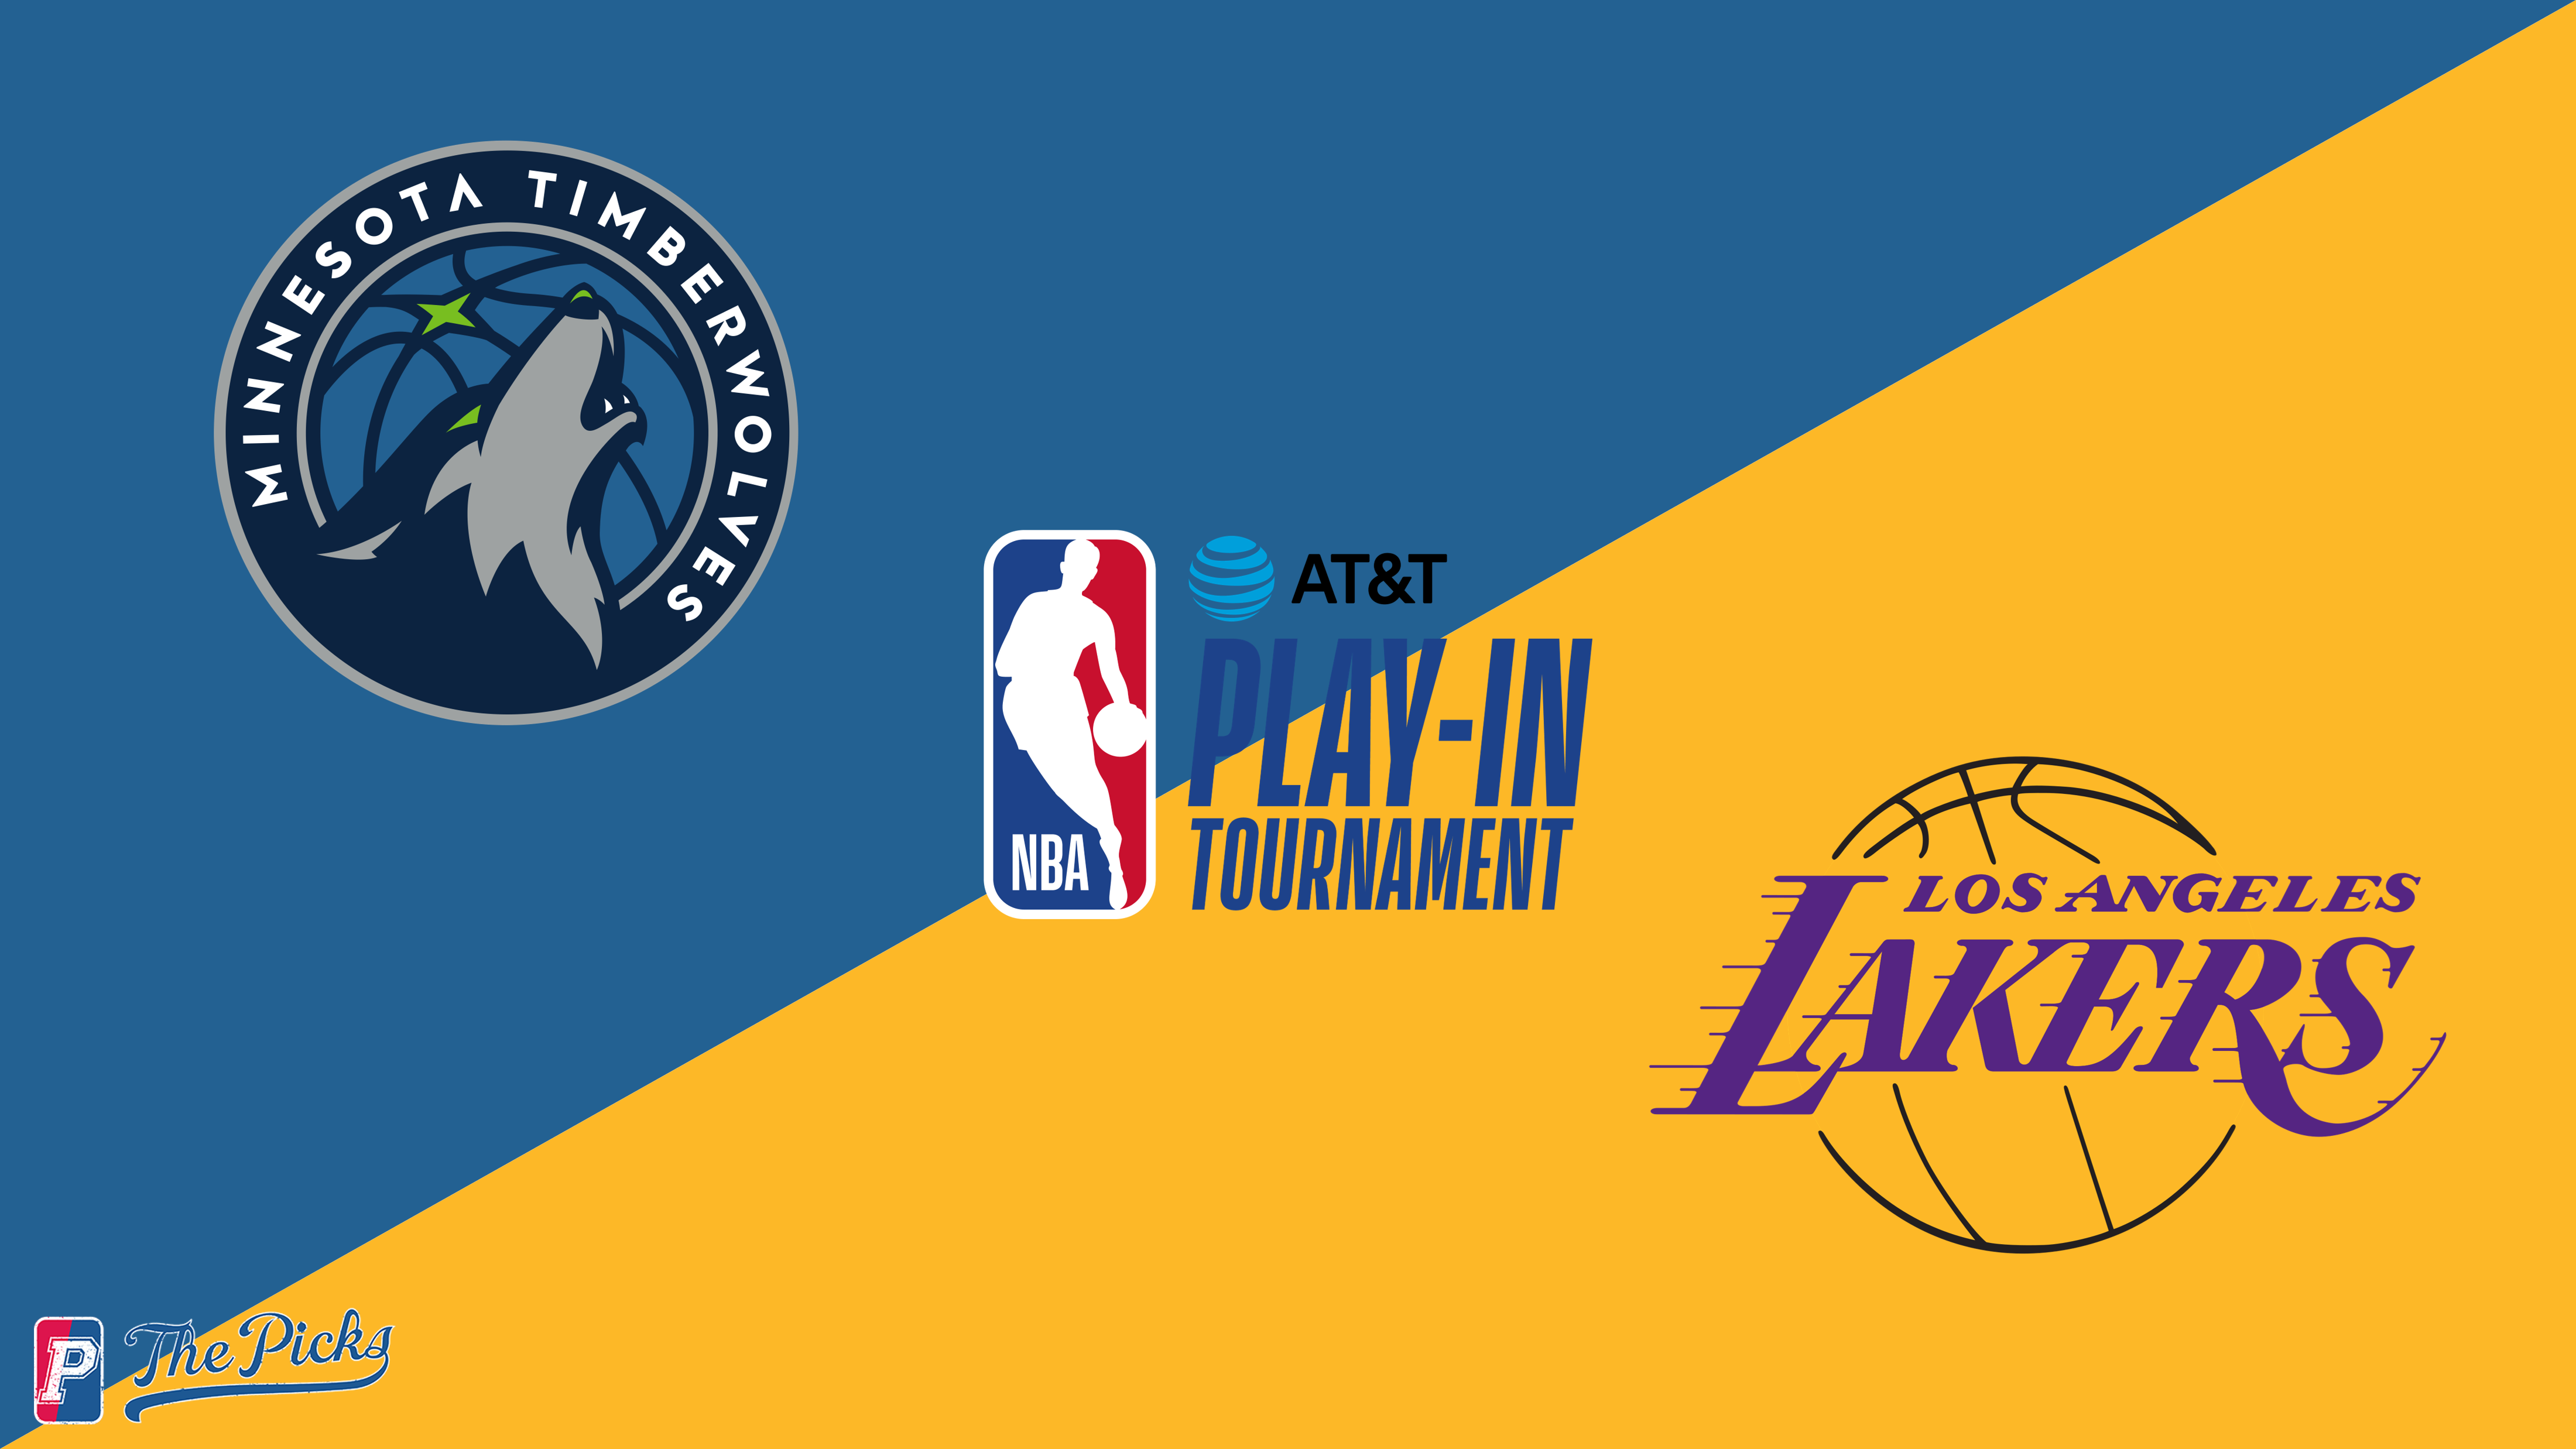 Timberwolves visiting Lakers on Play-In